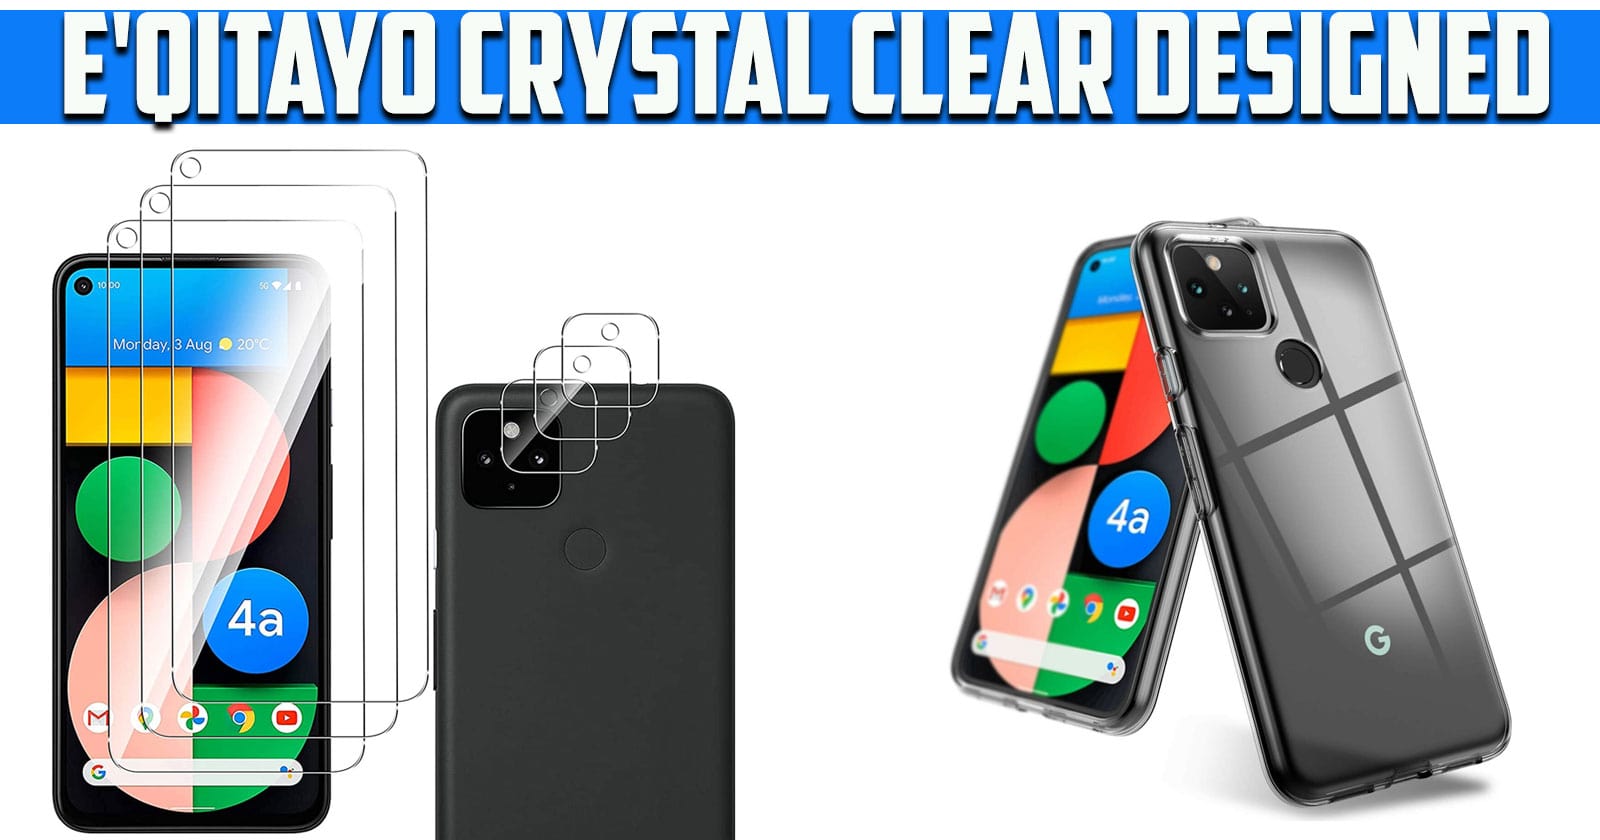 E'QITAYO Crystal Clear Designed for Google Pixel 4A